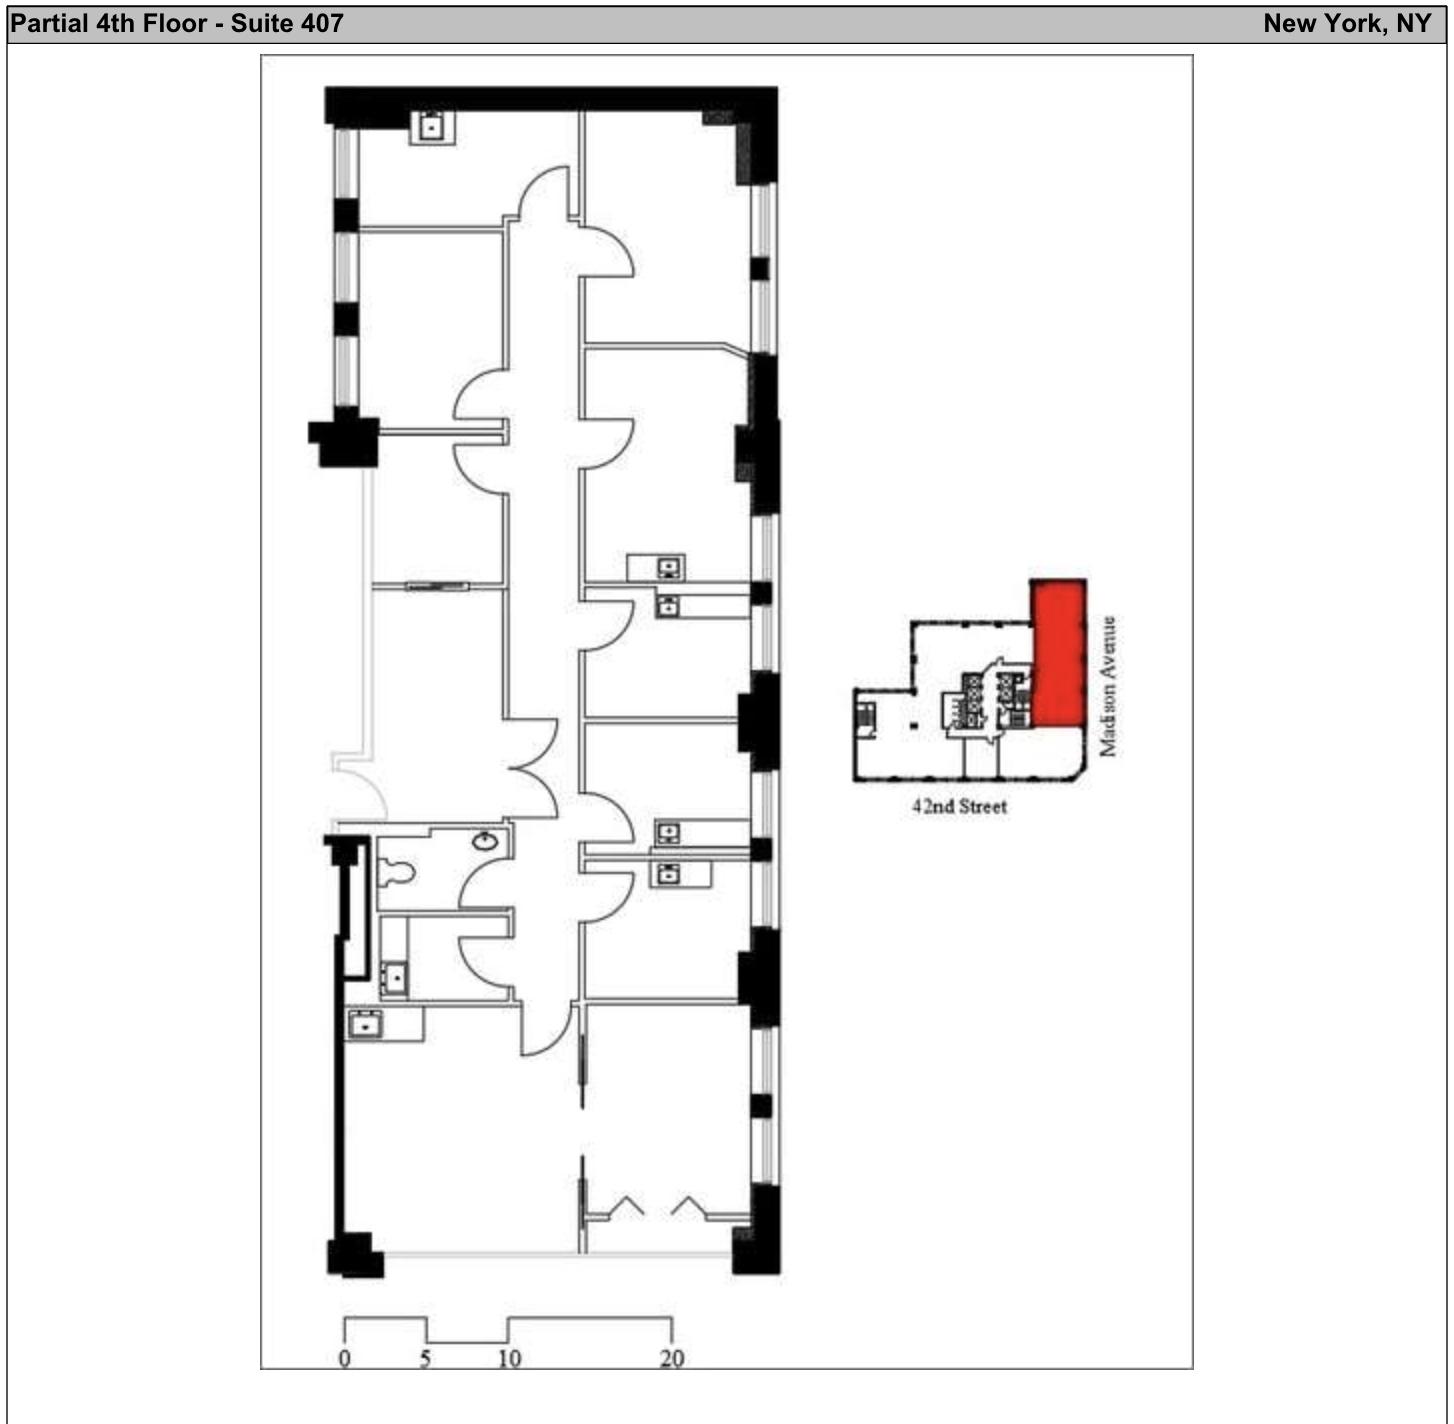 Floor plan of 315 Madison Avenue medical office space, NYC